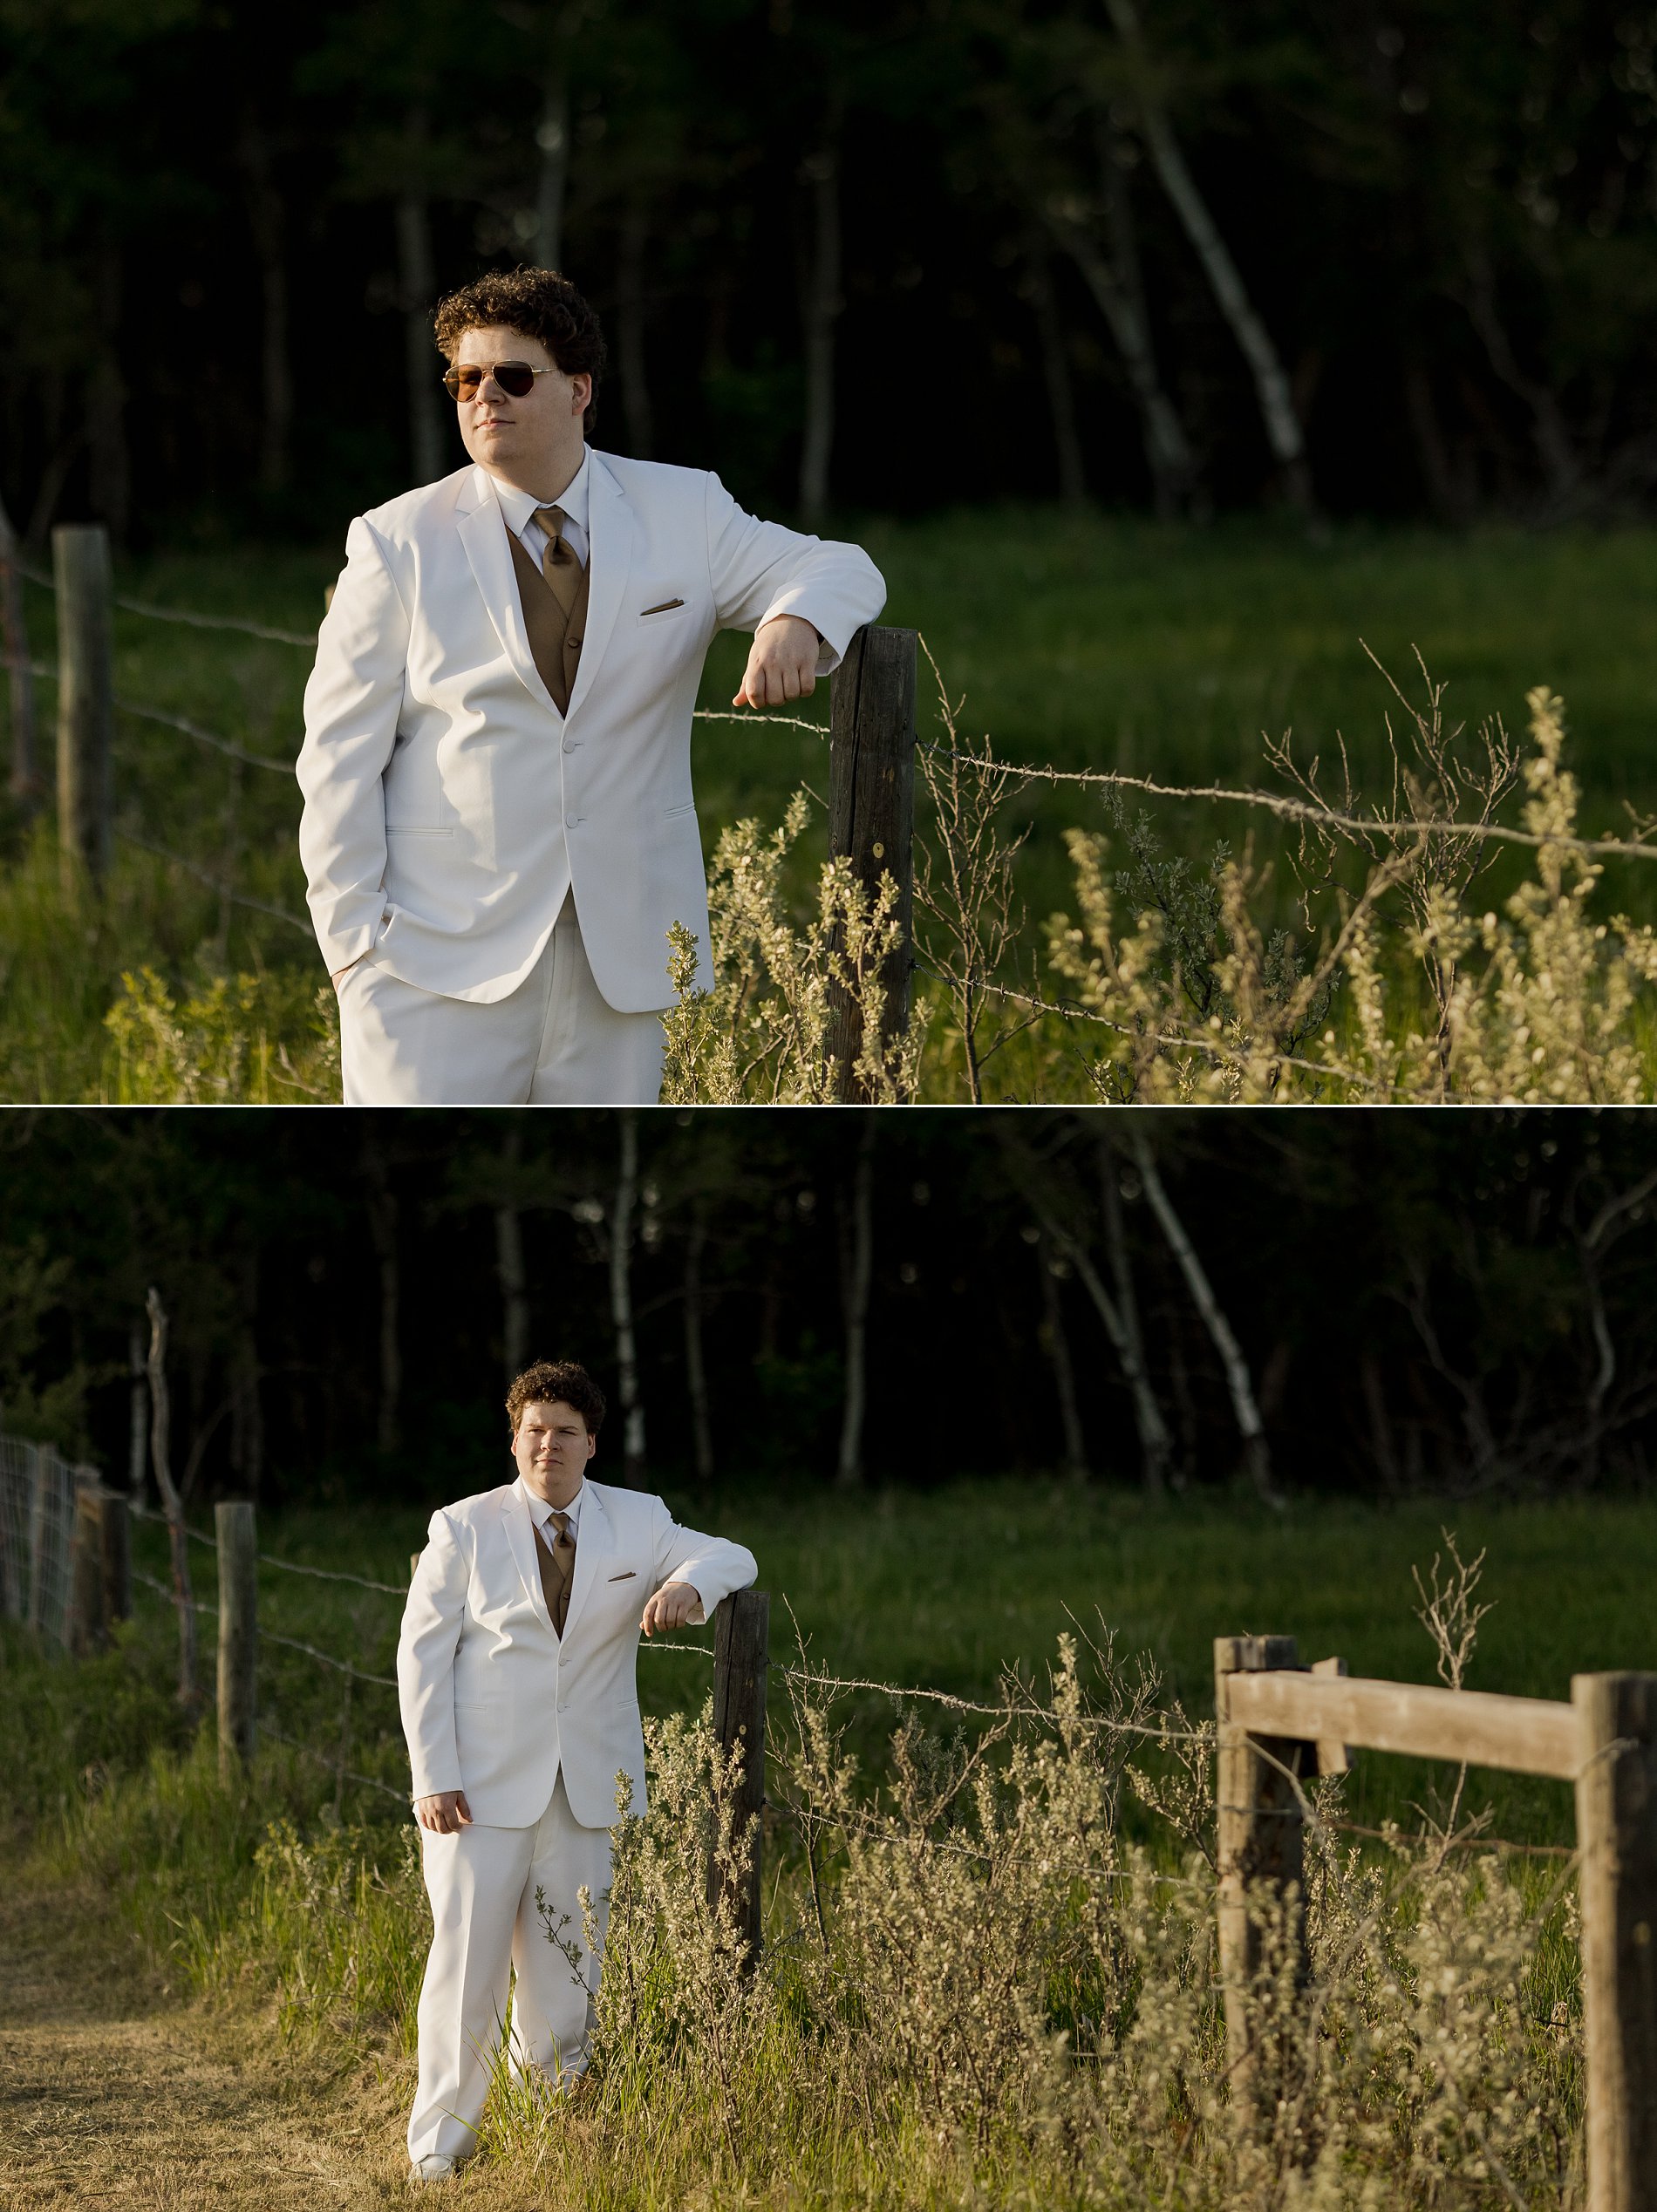 High school senior boy in an all-white suit, leaning against a fencepost for his Delisle Composite High School graduation photos.